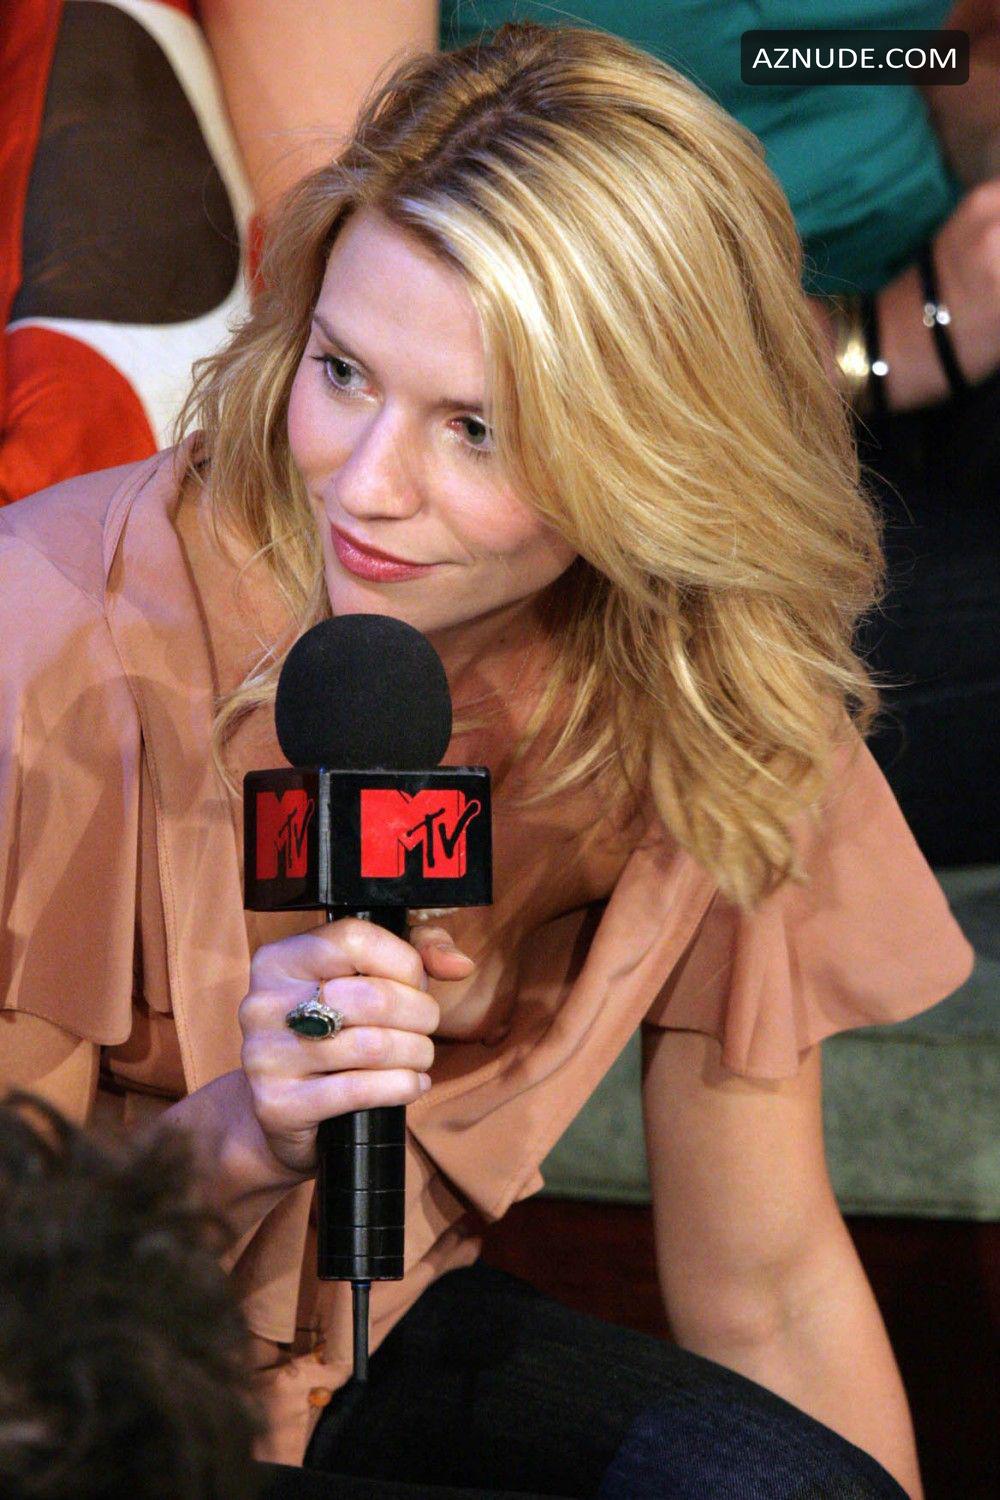 betty reiner recommends claire danes nude pics pic